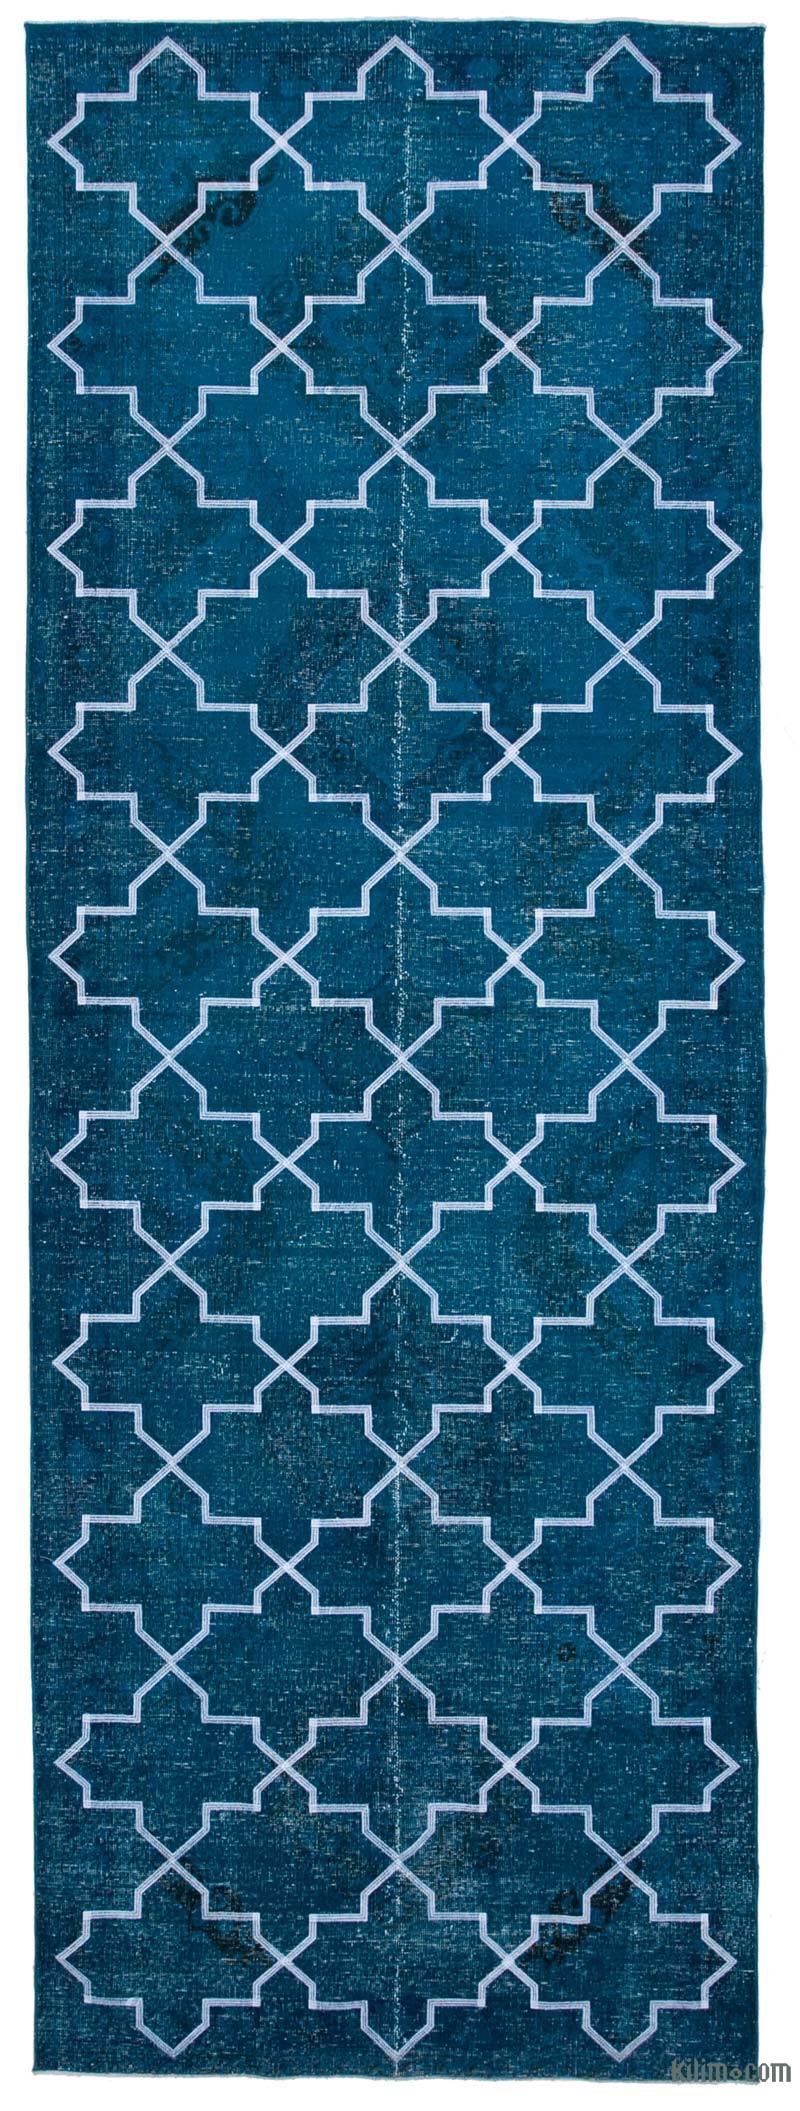 Embroidered Over-dyed Turkish Vintage Runner - 4' 9" x 13' 4" (57 in. x 160 in.) - K0038787